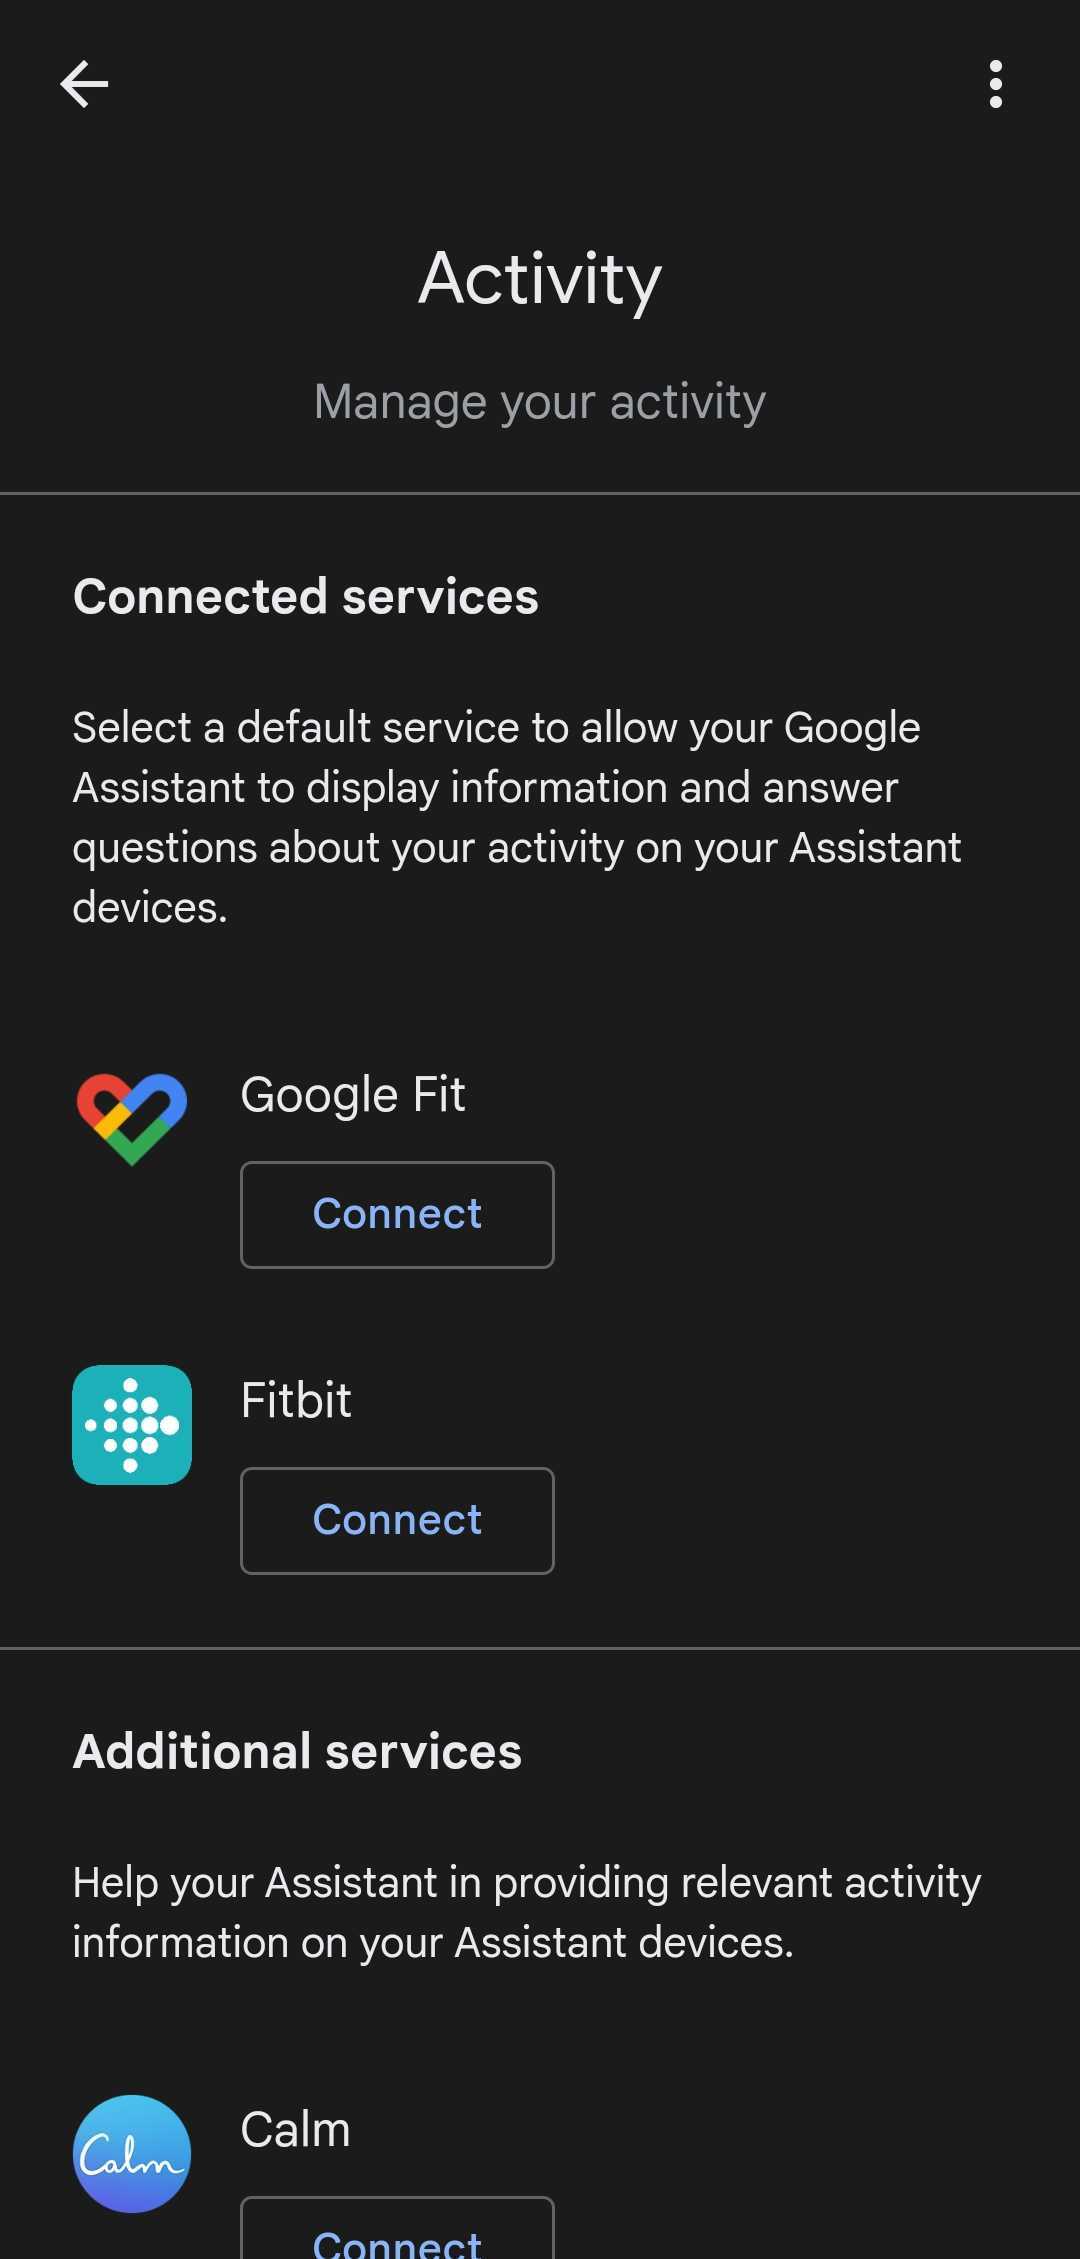 Google Fit and Fitbit integration with Assistant